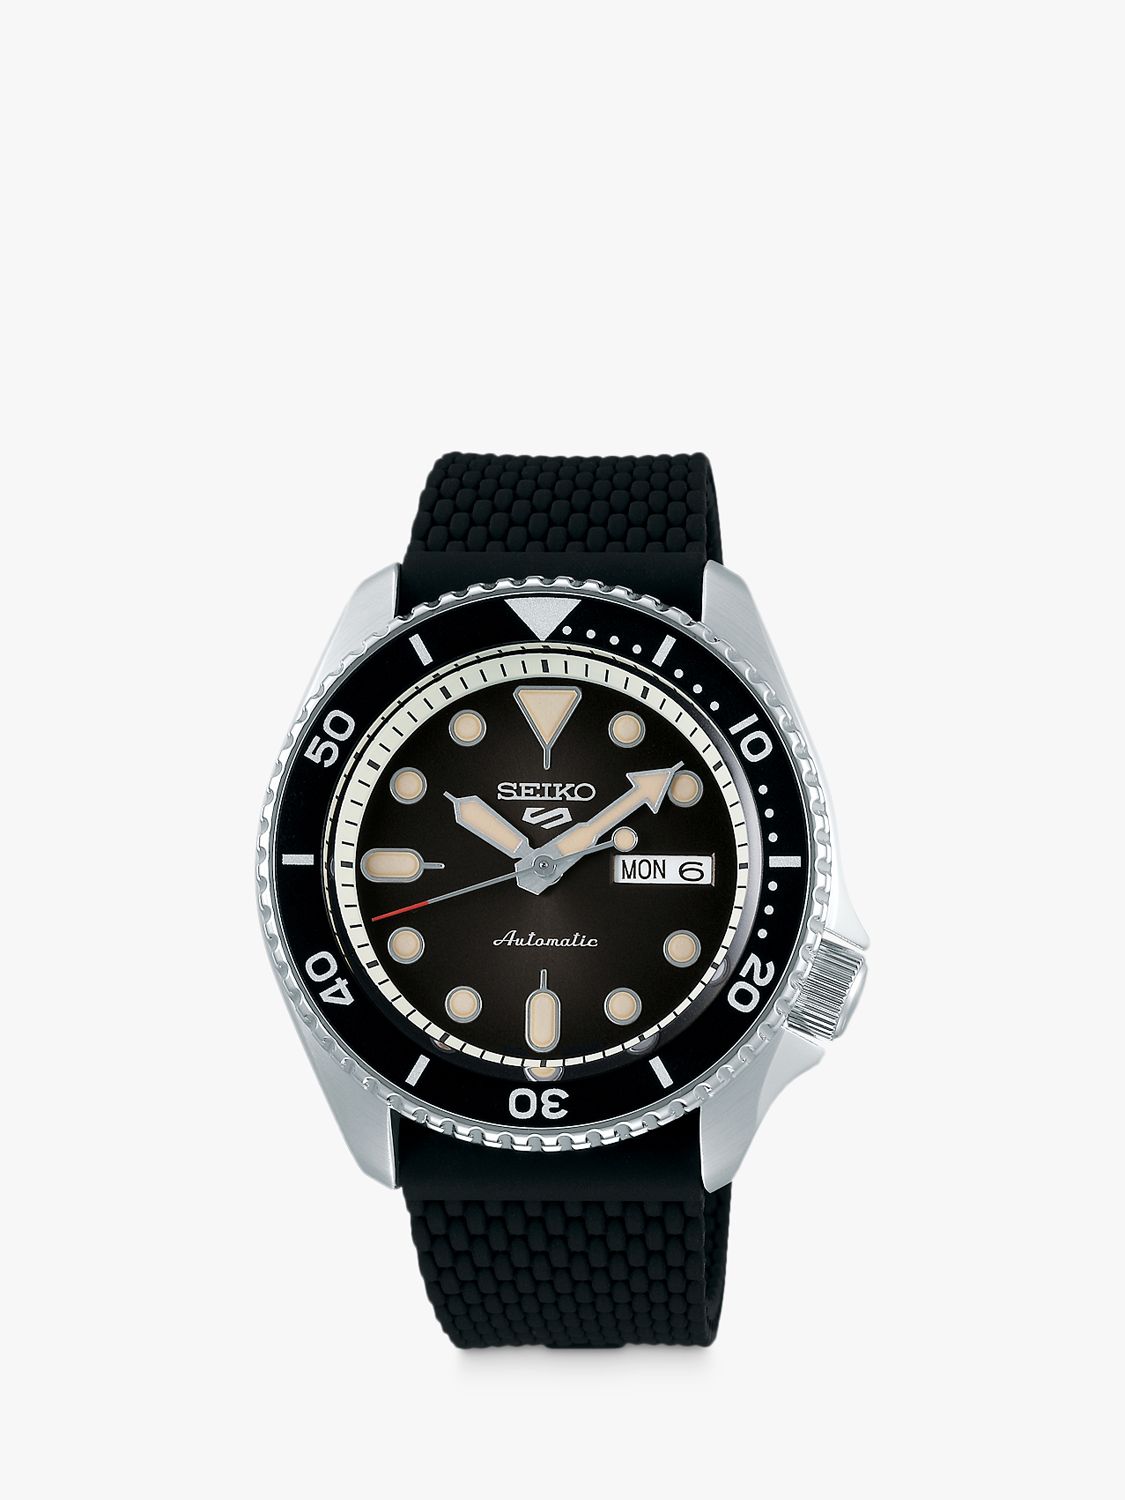 Seiko SRPD73K2 Men's 5 Sports Automatic Day Date Rubber Strap Watch, Black  at John Lewis & Partners